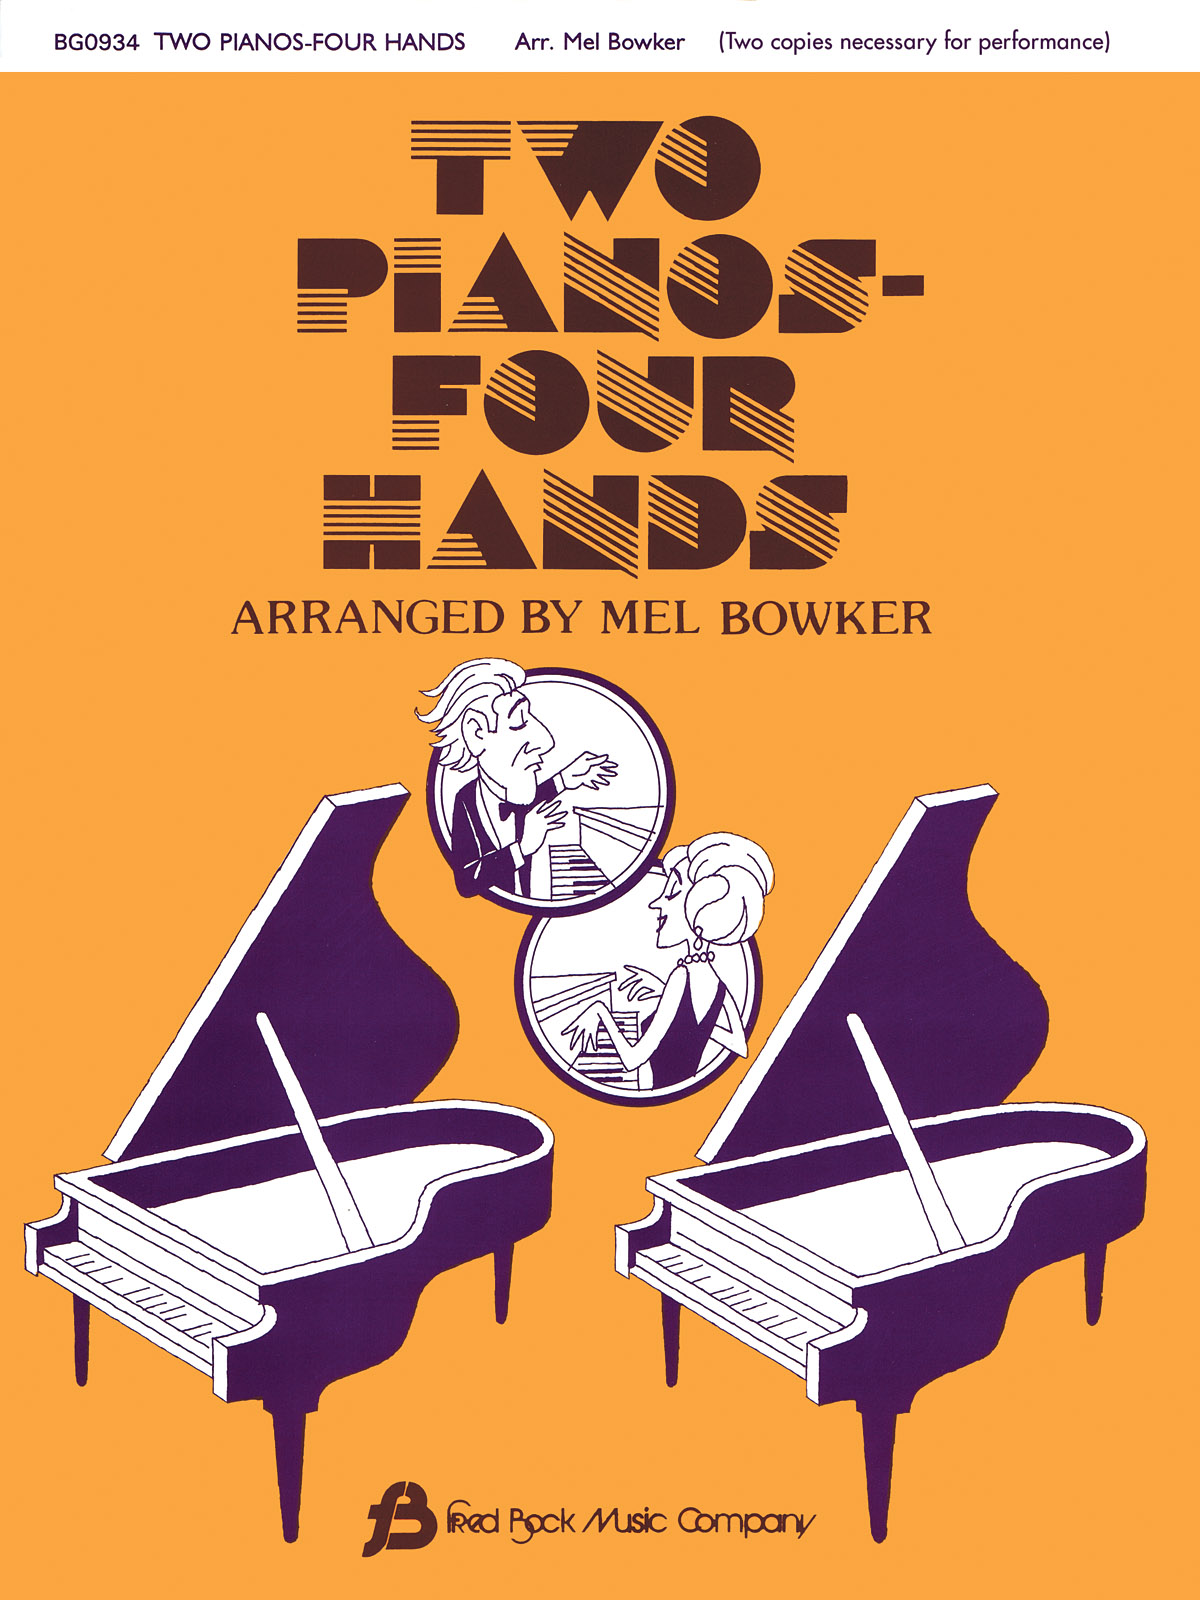 Two Pianos-Fourhands Keyboard Duets